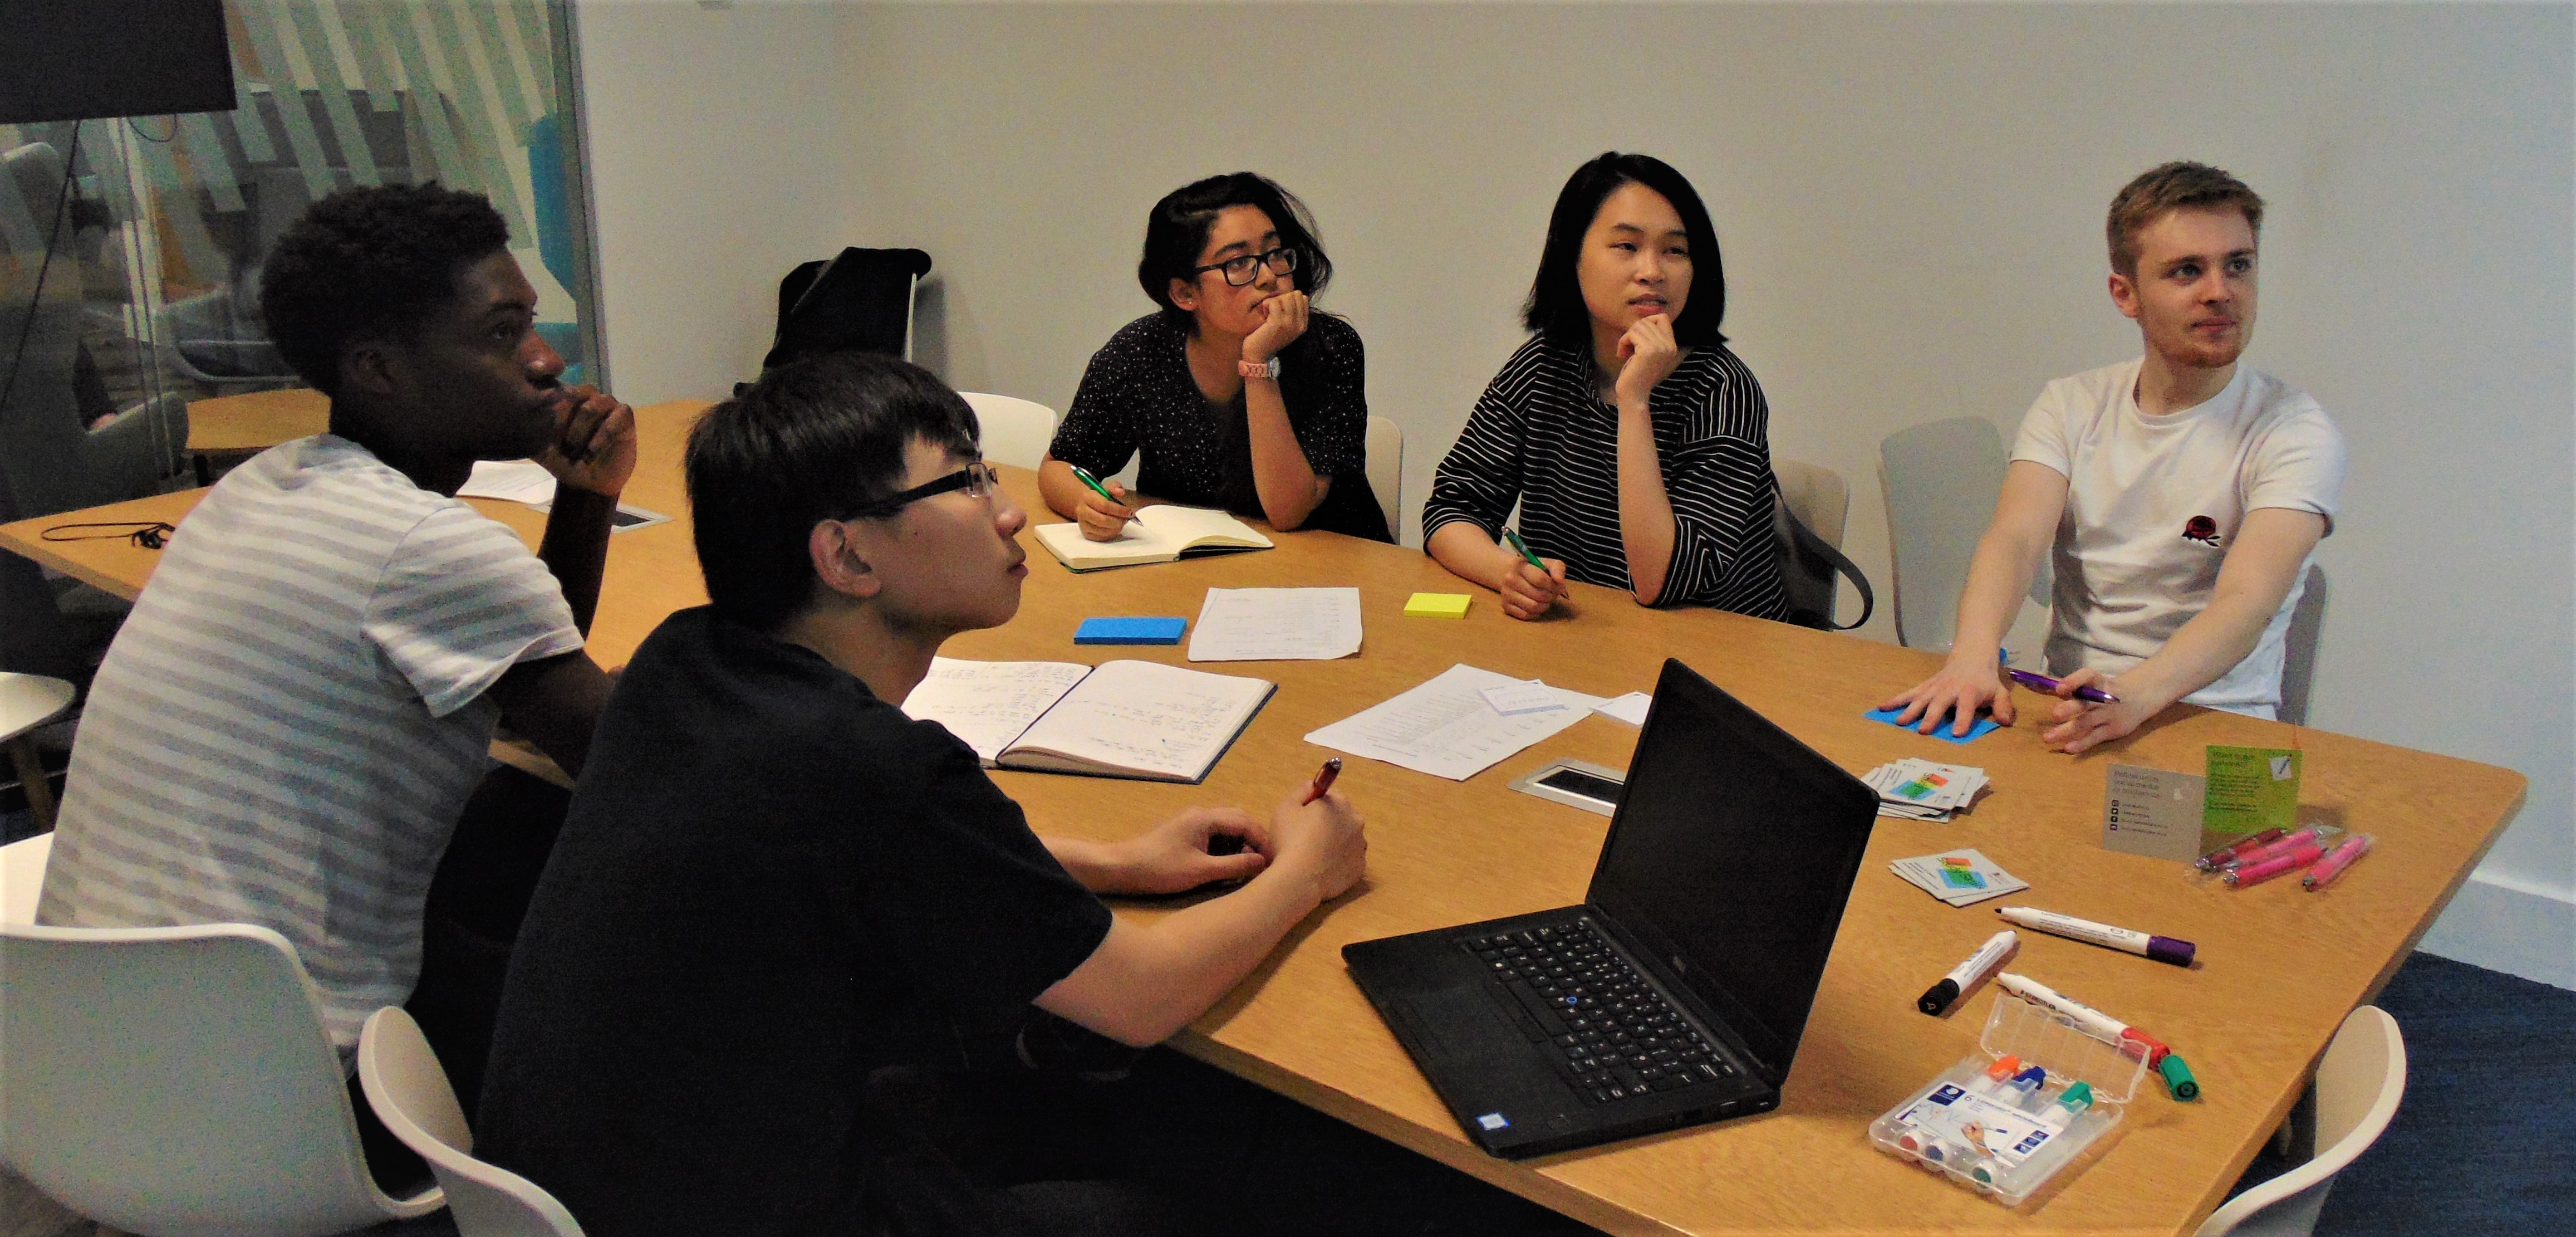 A group of students attending an in-person study skills session.